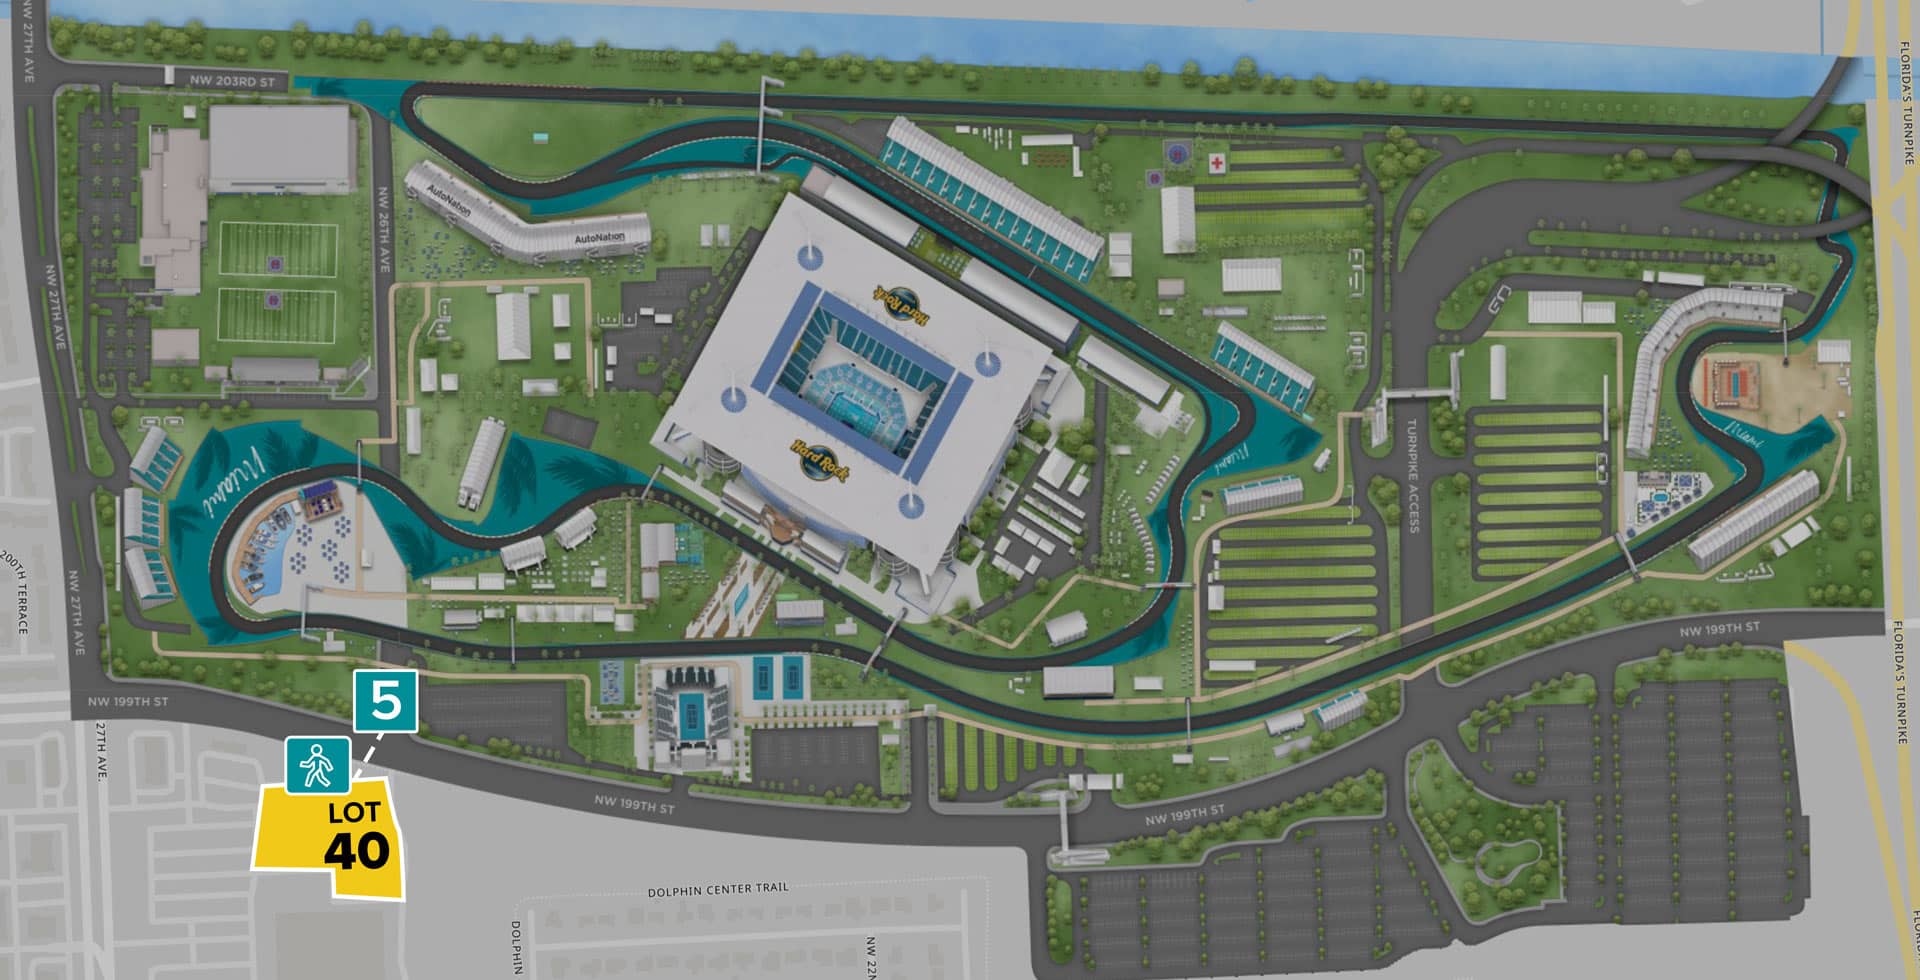 Parking Lot Location Map for Yellow Lot 40 at the Formula 1 Crypto.com Miami Grand Prix